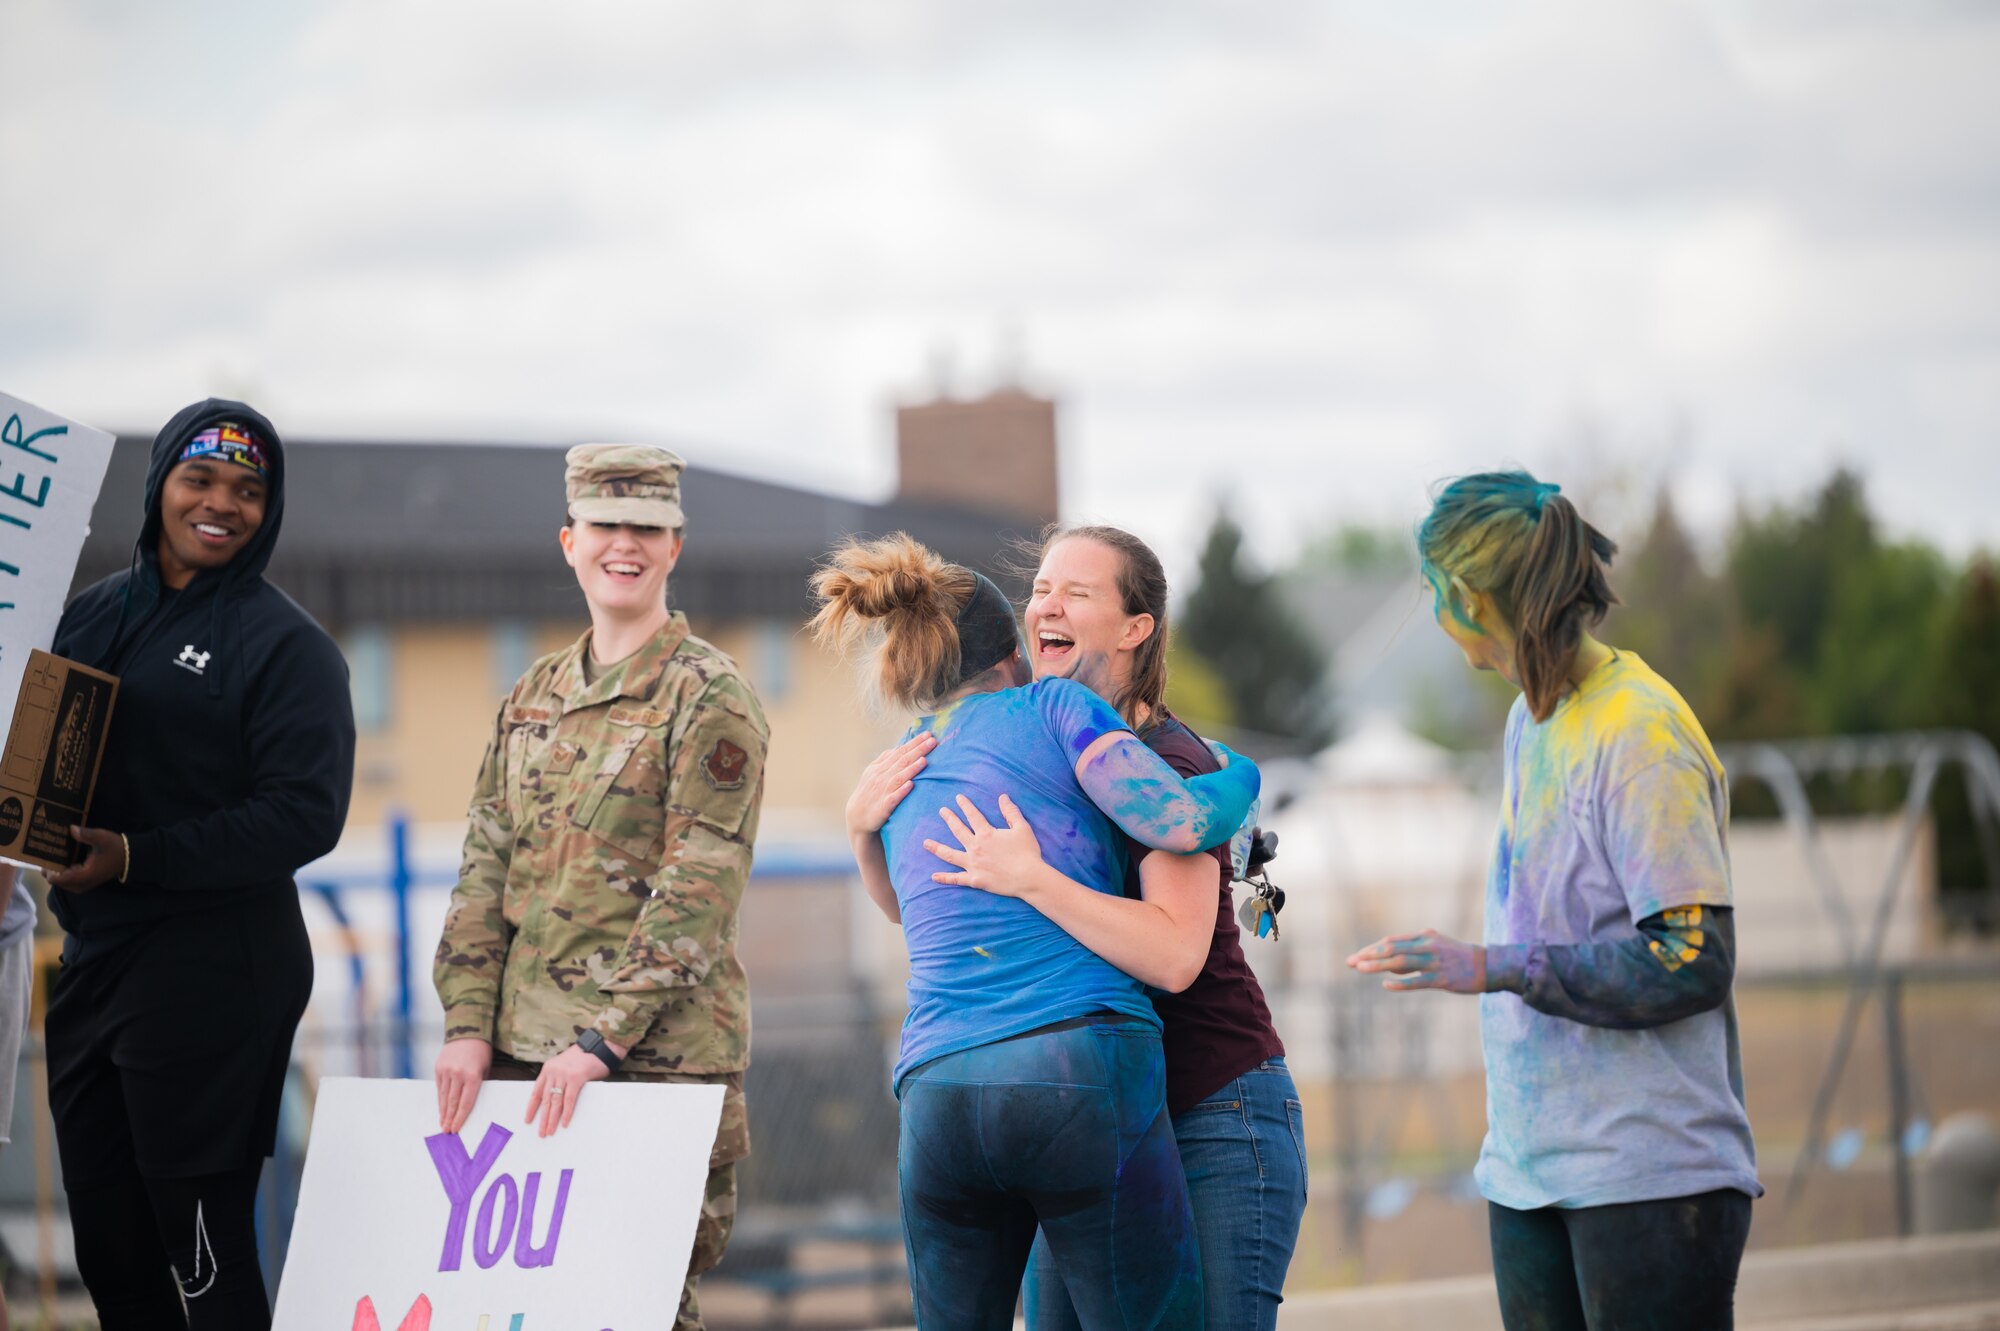 Lt. Col. Corrie Pecoraro, 341st Force Support Squadron commander, hugs Serena Sargent, 341st Missile Wing violence prevention integrator, after crossing the finish line during a Suicide Awareness Color Run Sept. 9, 2022, at Malmstrom Air Force Base, Mont.